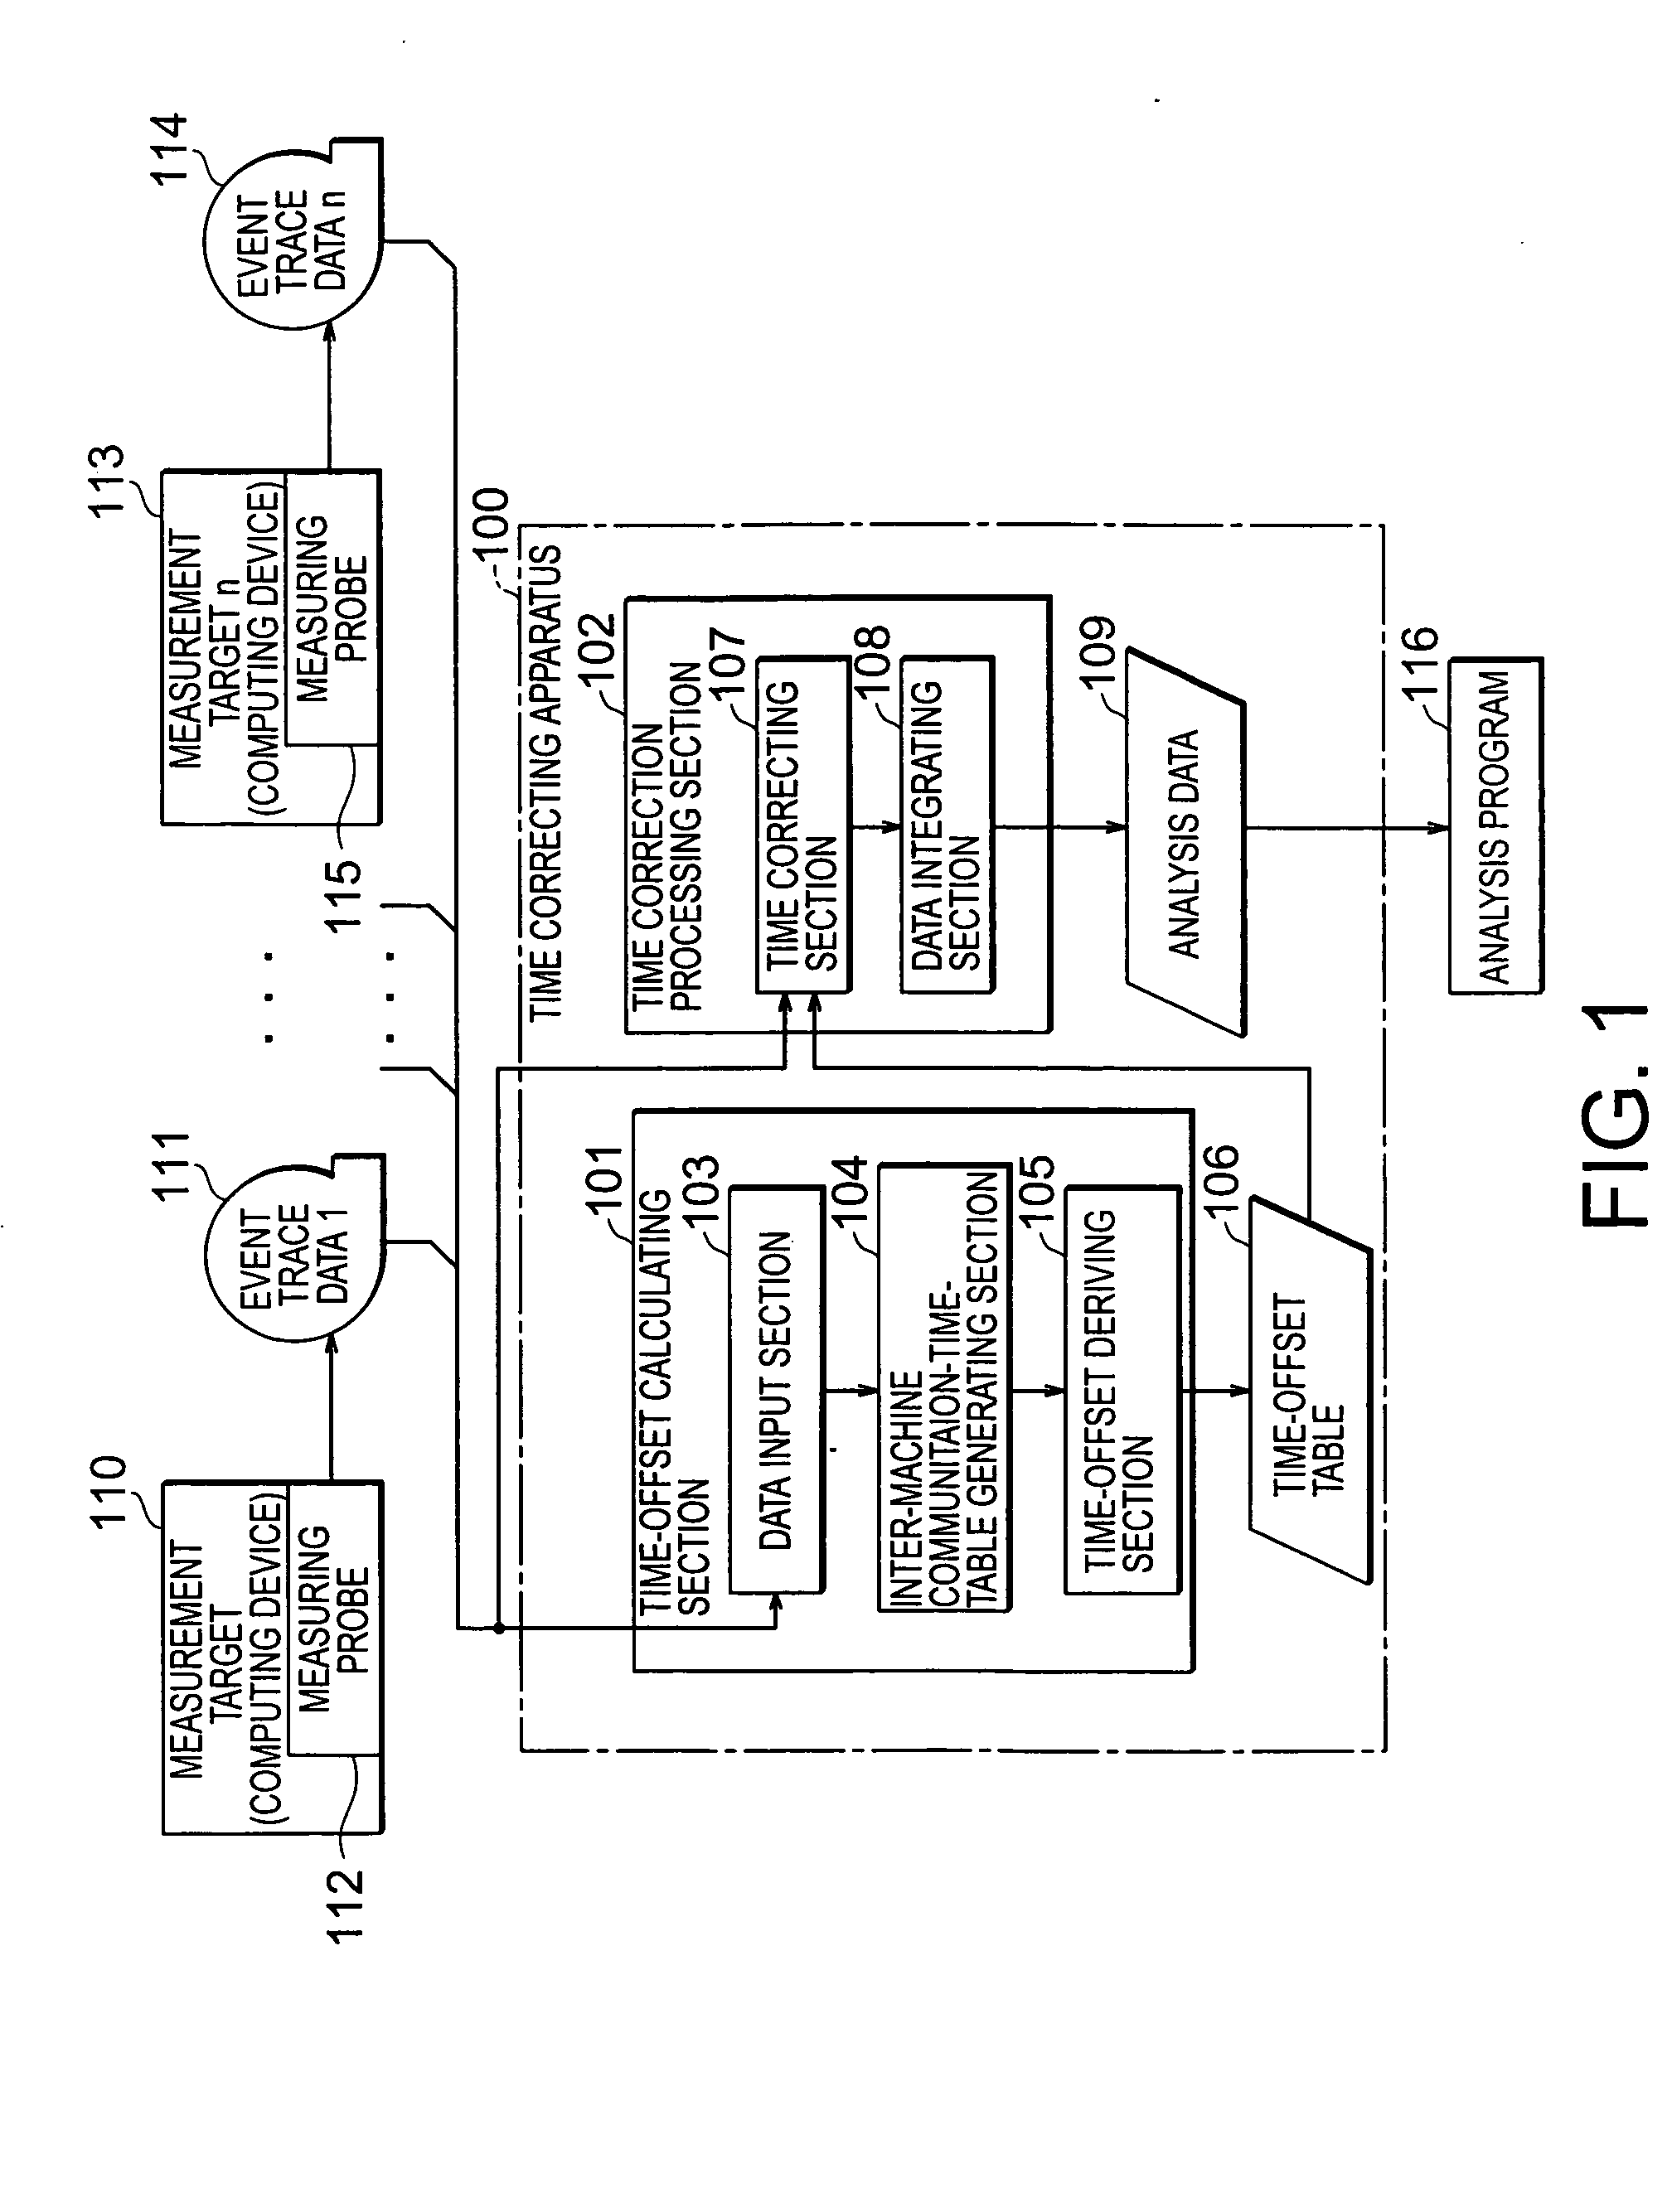 Apparatus, method, and program for correcting time of event trace data